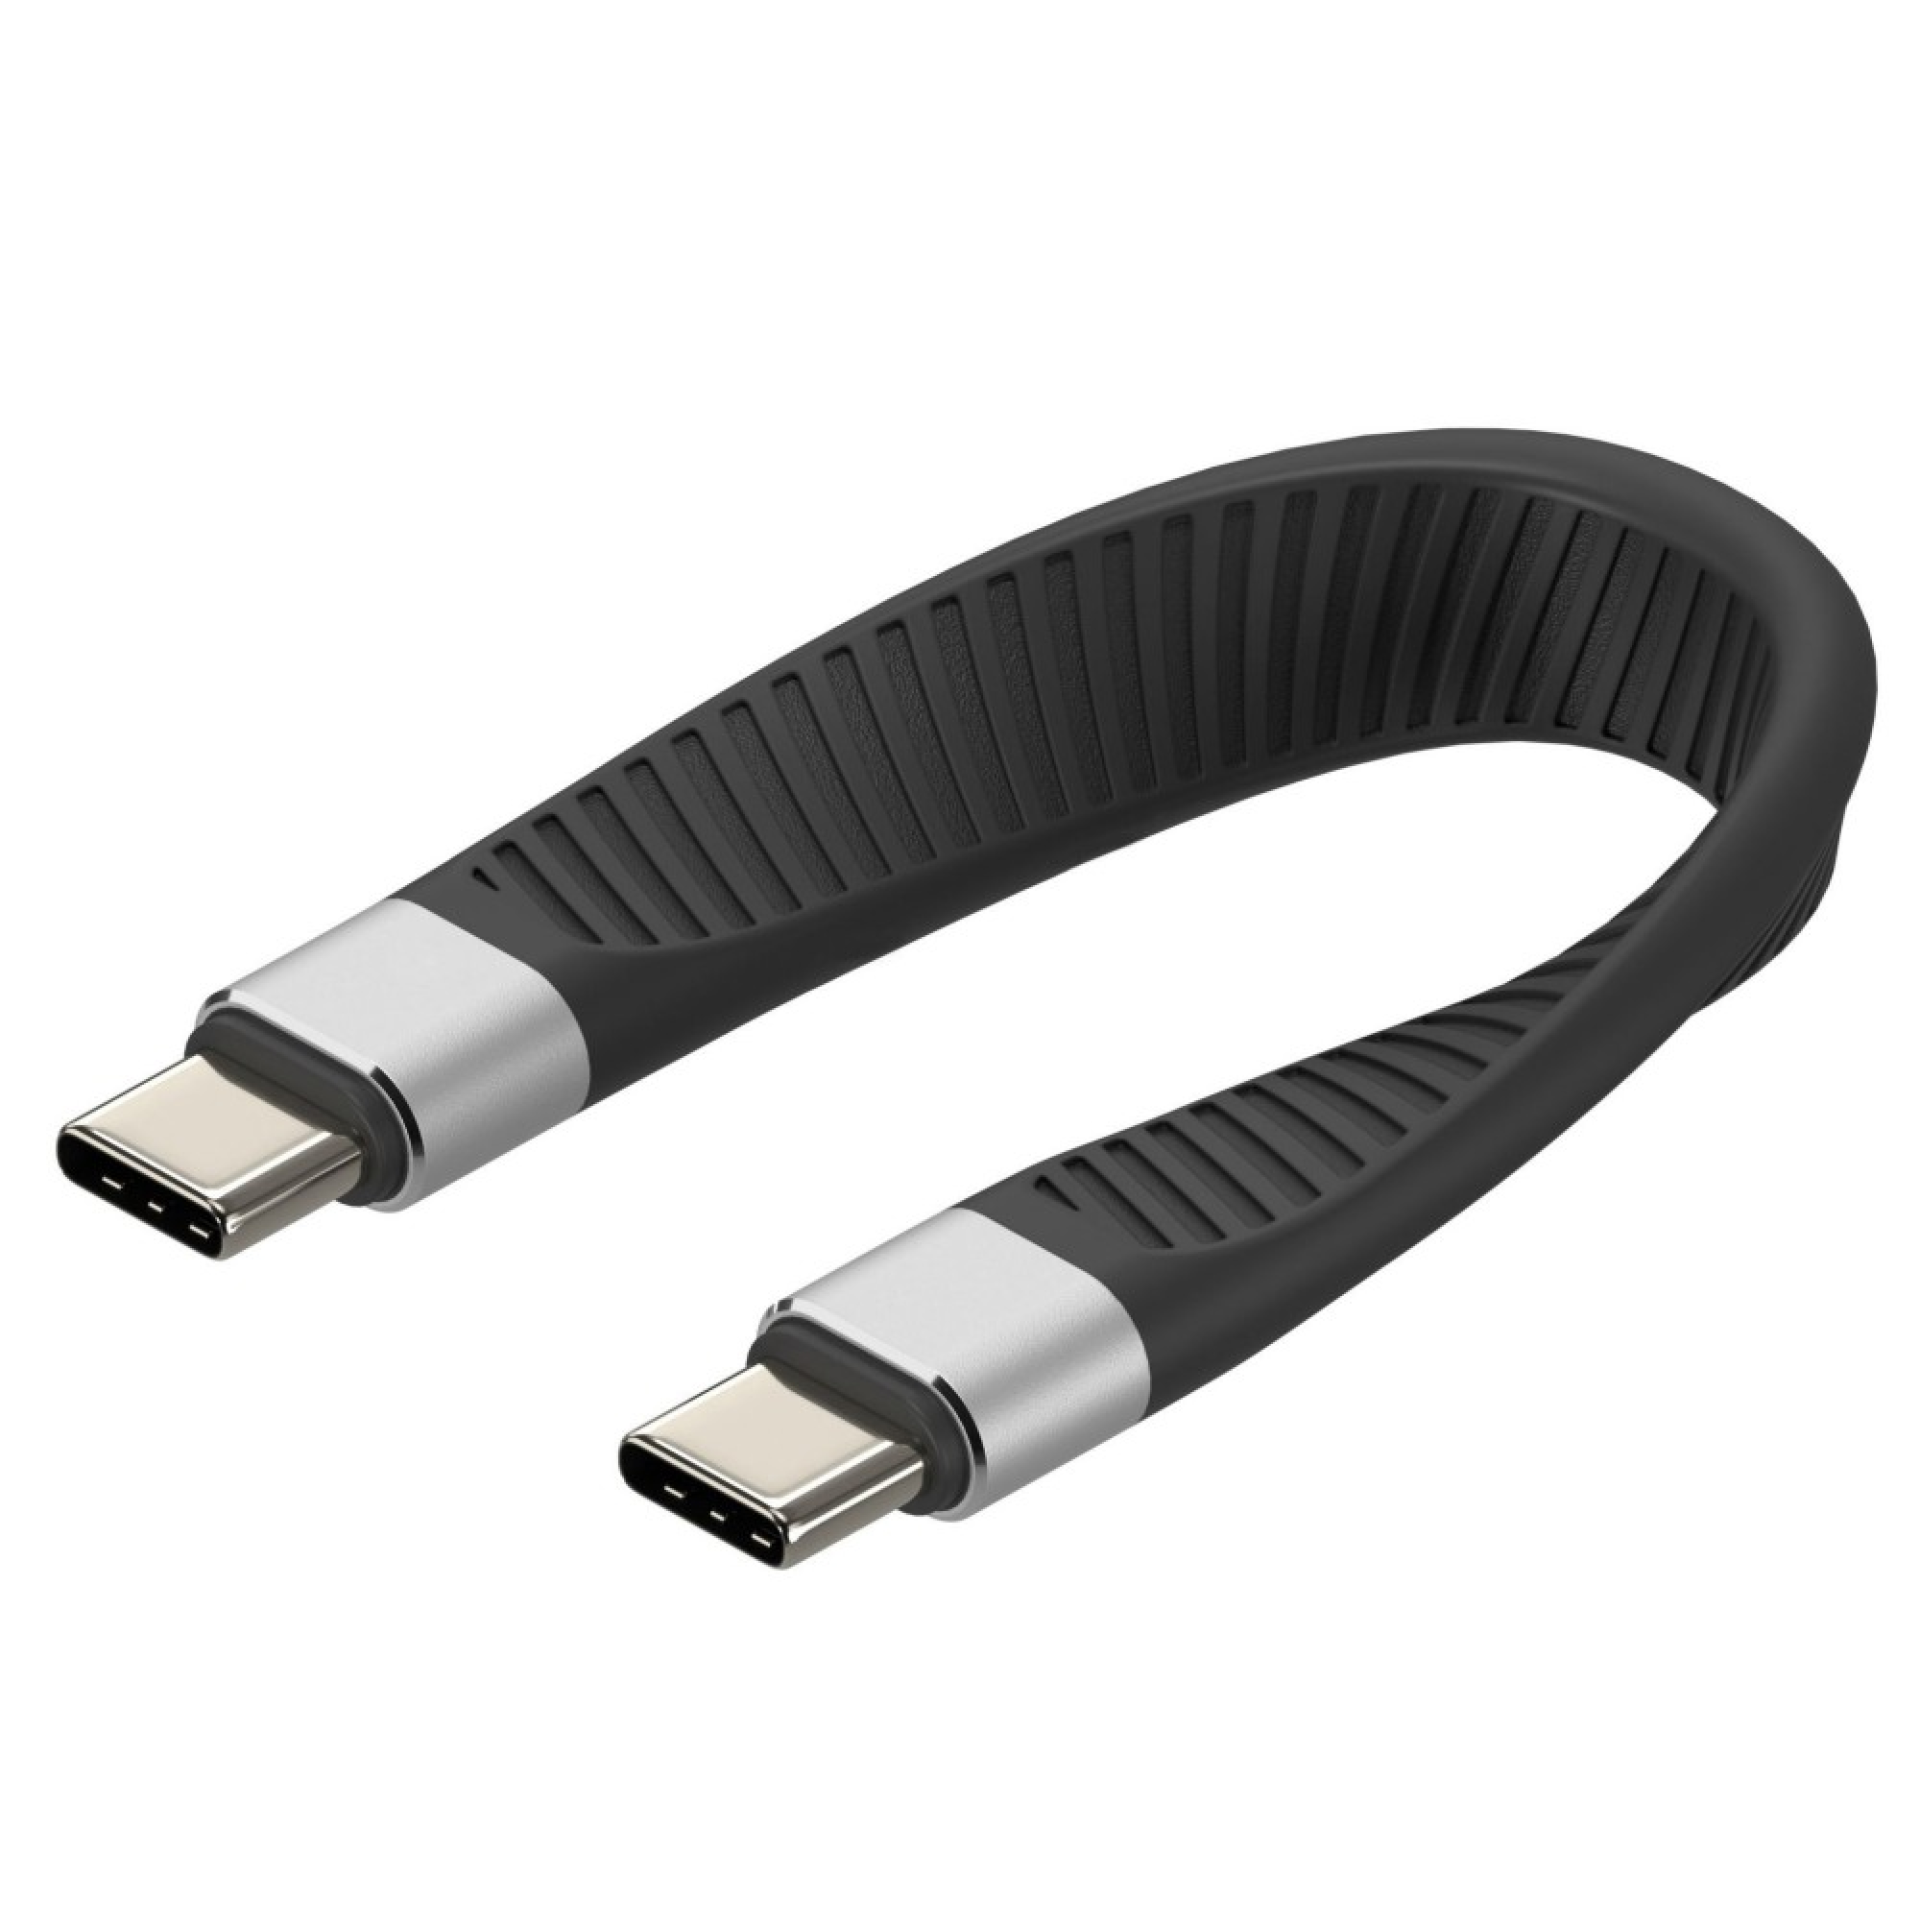 Techly USB-C male to USB-C male, short, flat FPC fast charging cable